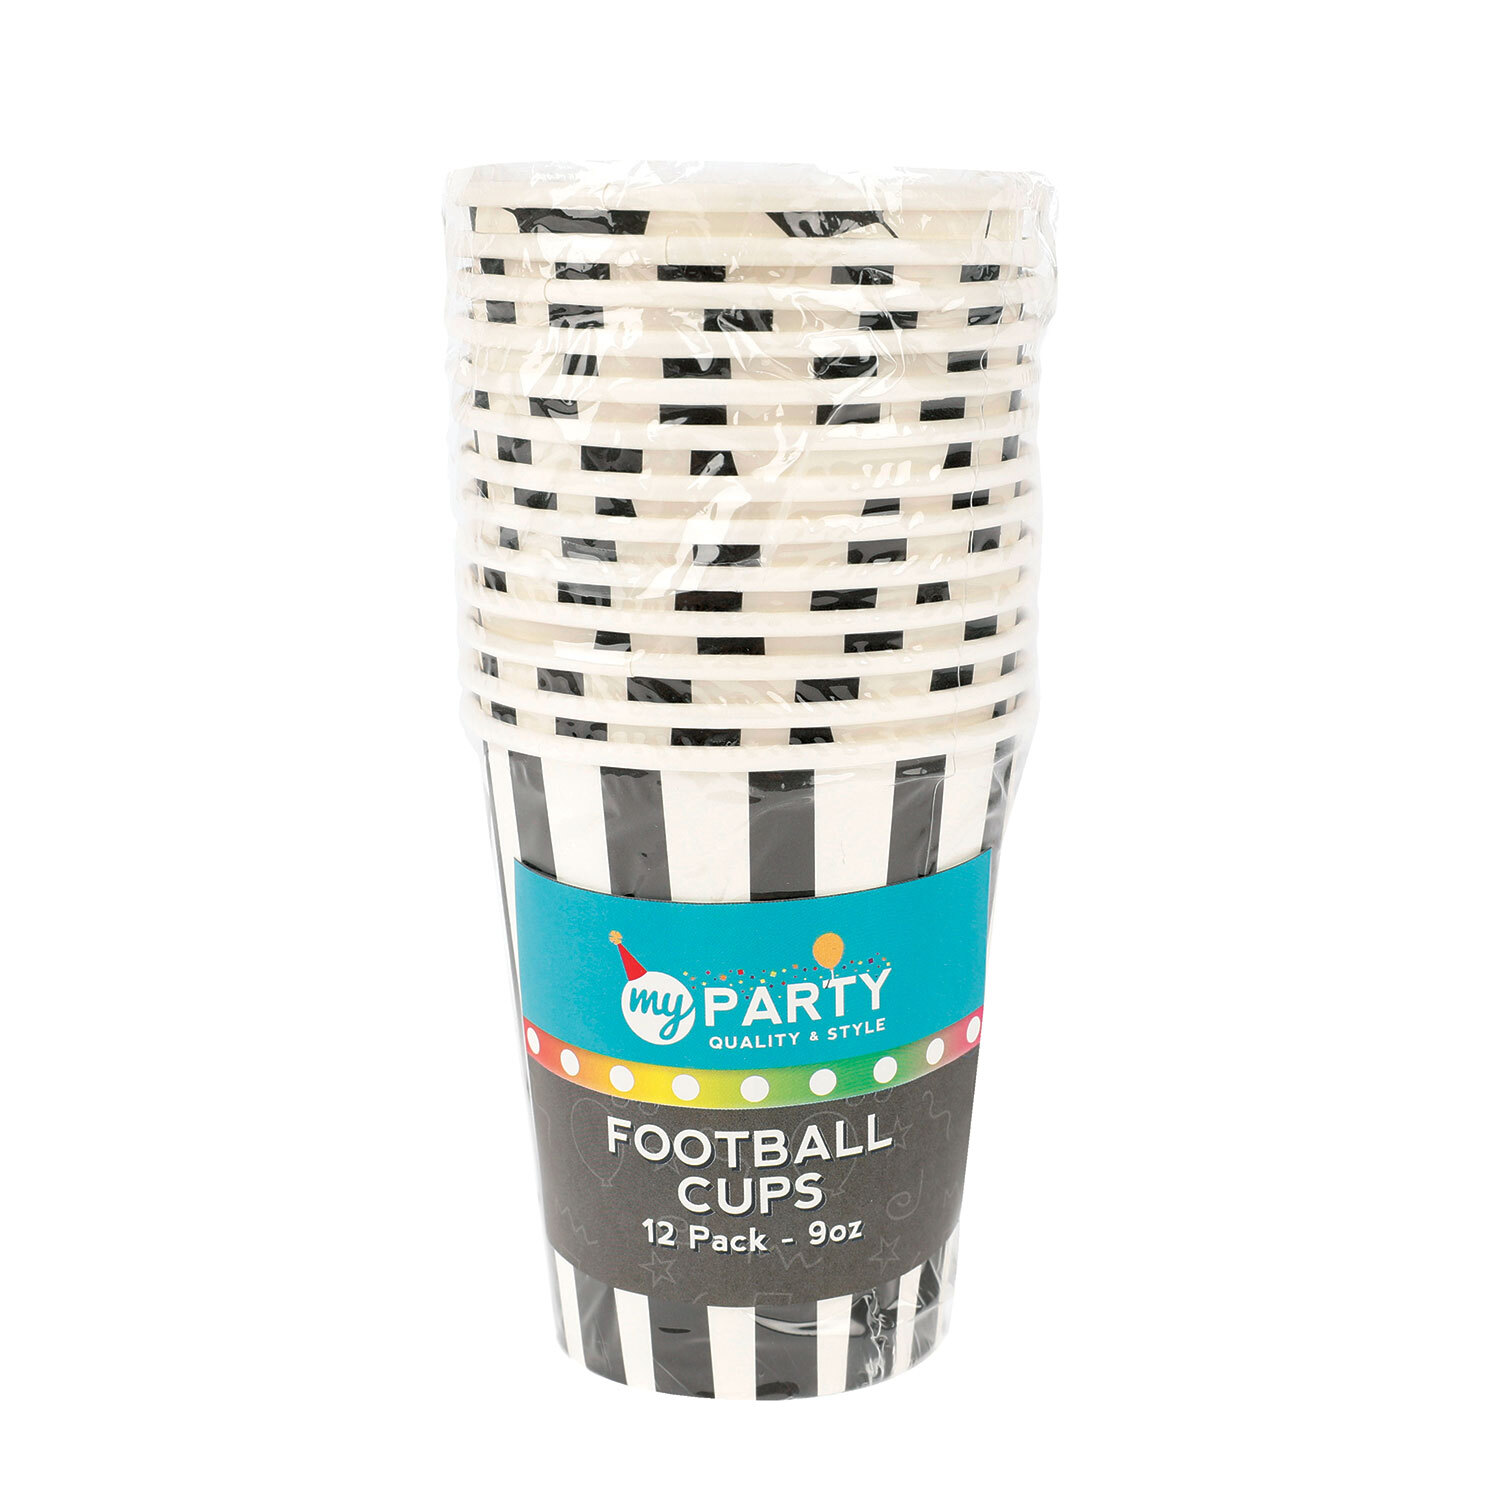 Single My Party Football Cups 12 Pack in Assorted styles Image 1